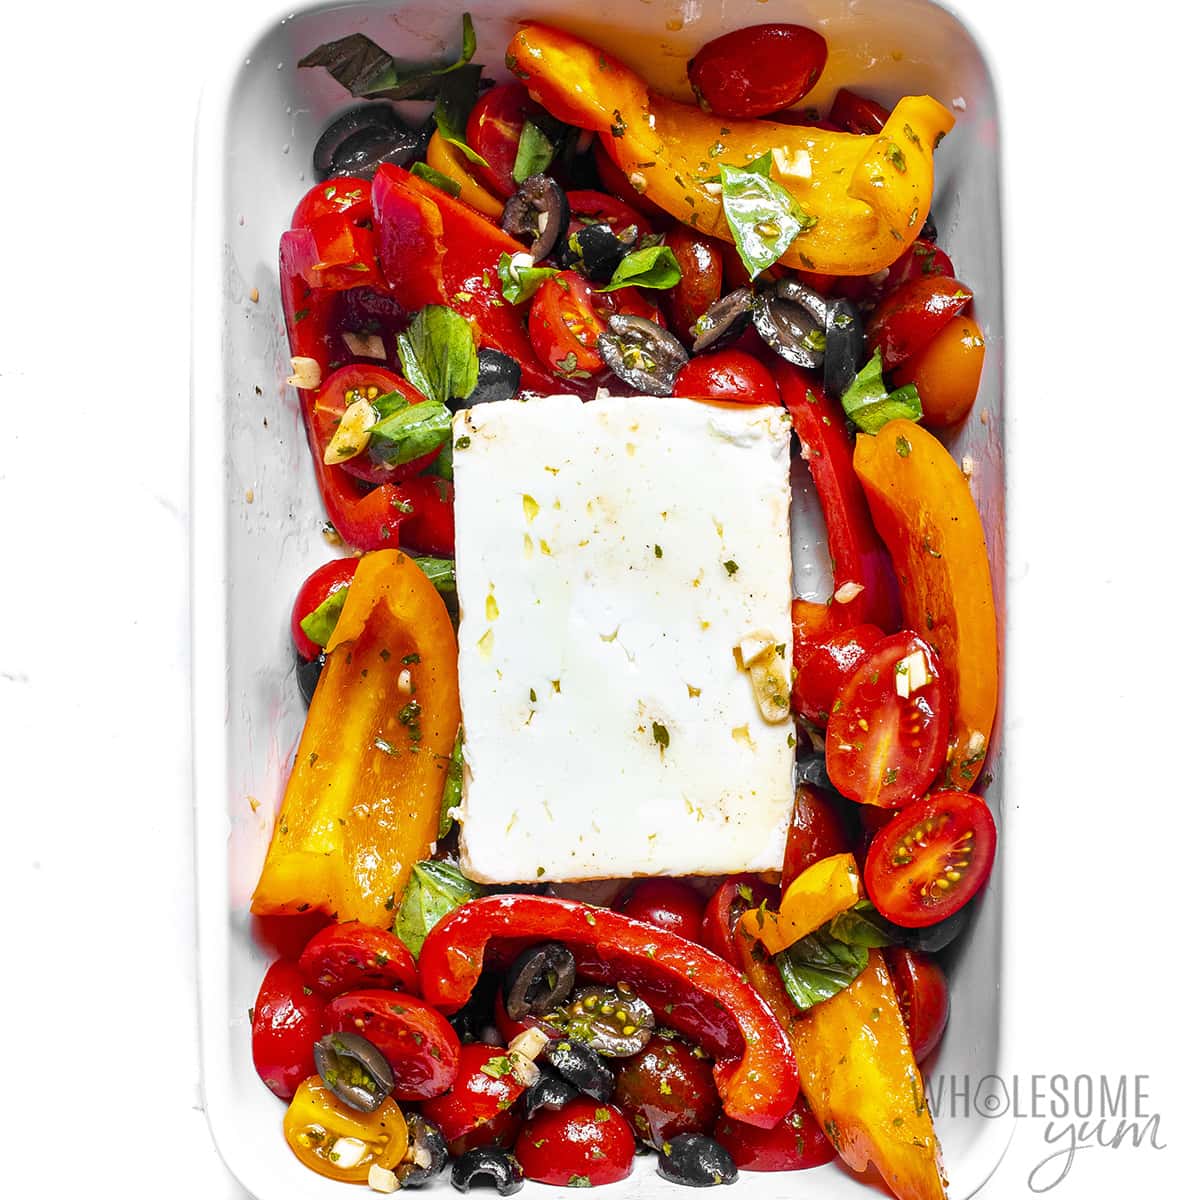 Feta cheese in the center of baking dish surrounded by veggies.